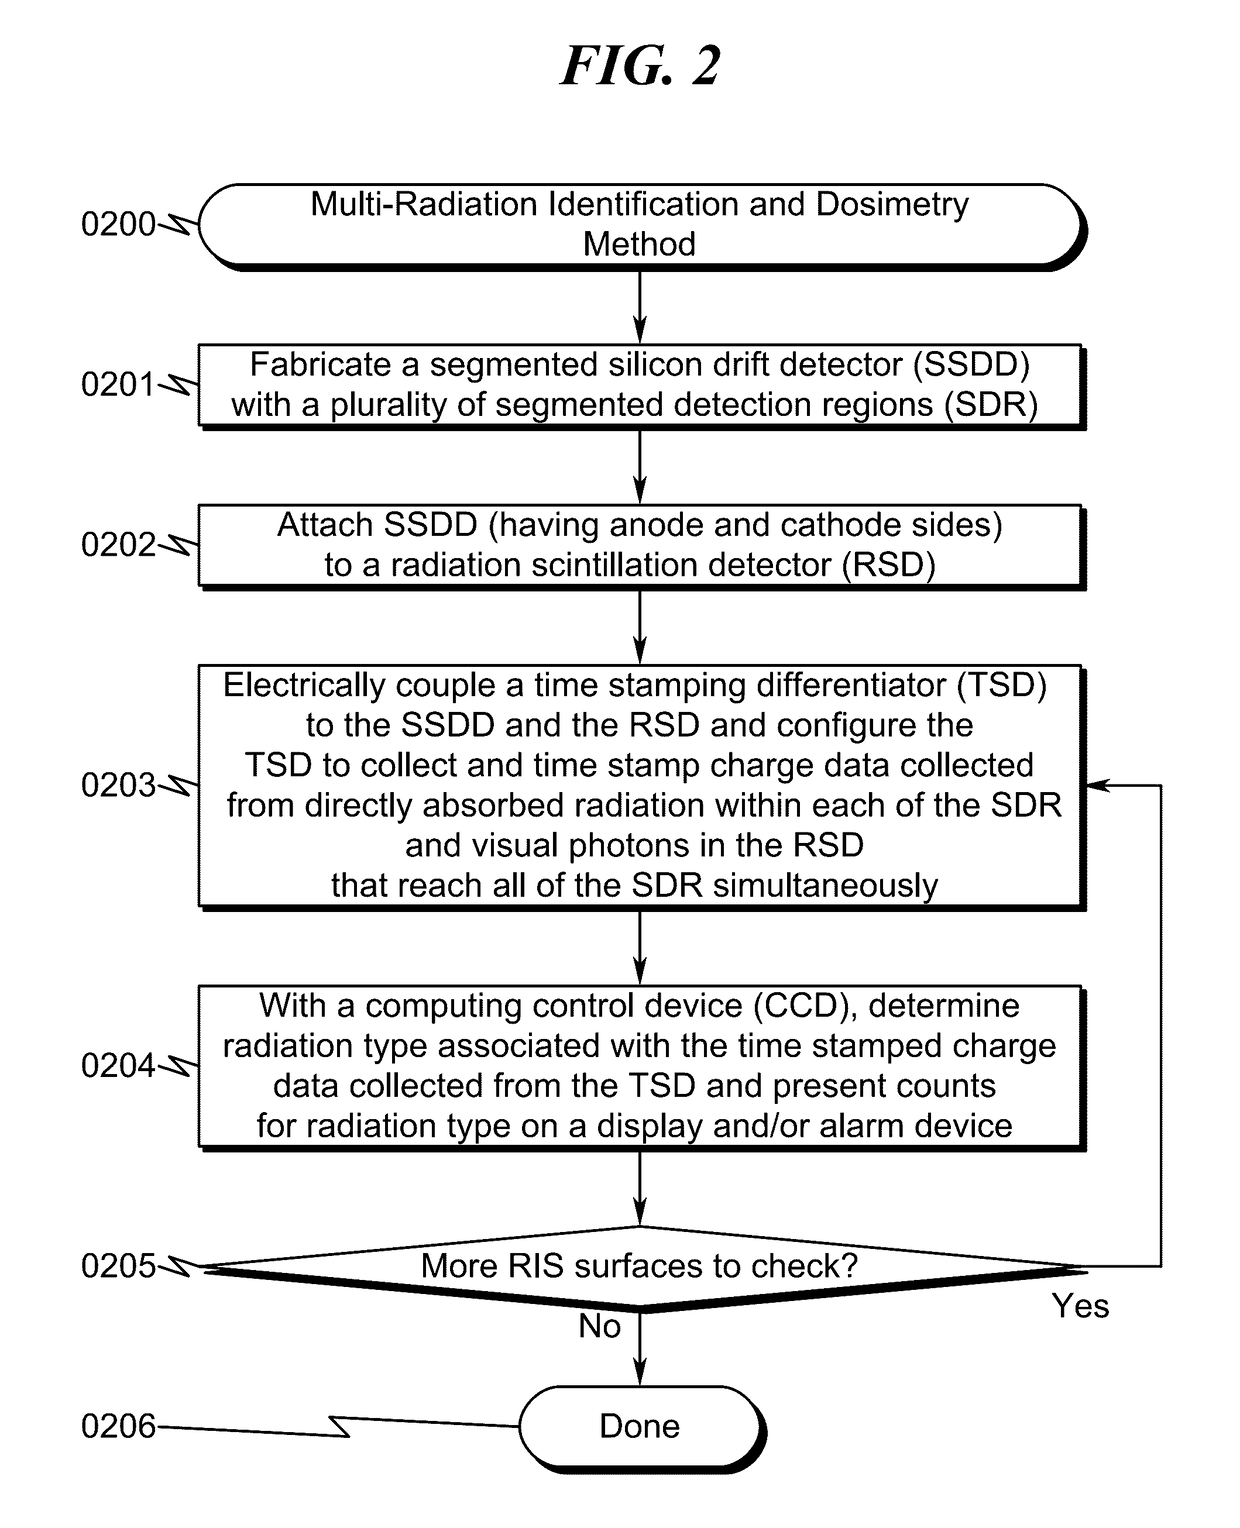 Multi-radiation identification and dosimetry system and method